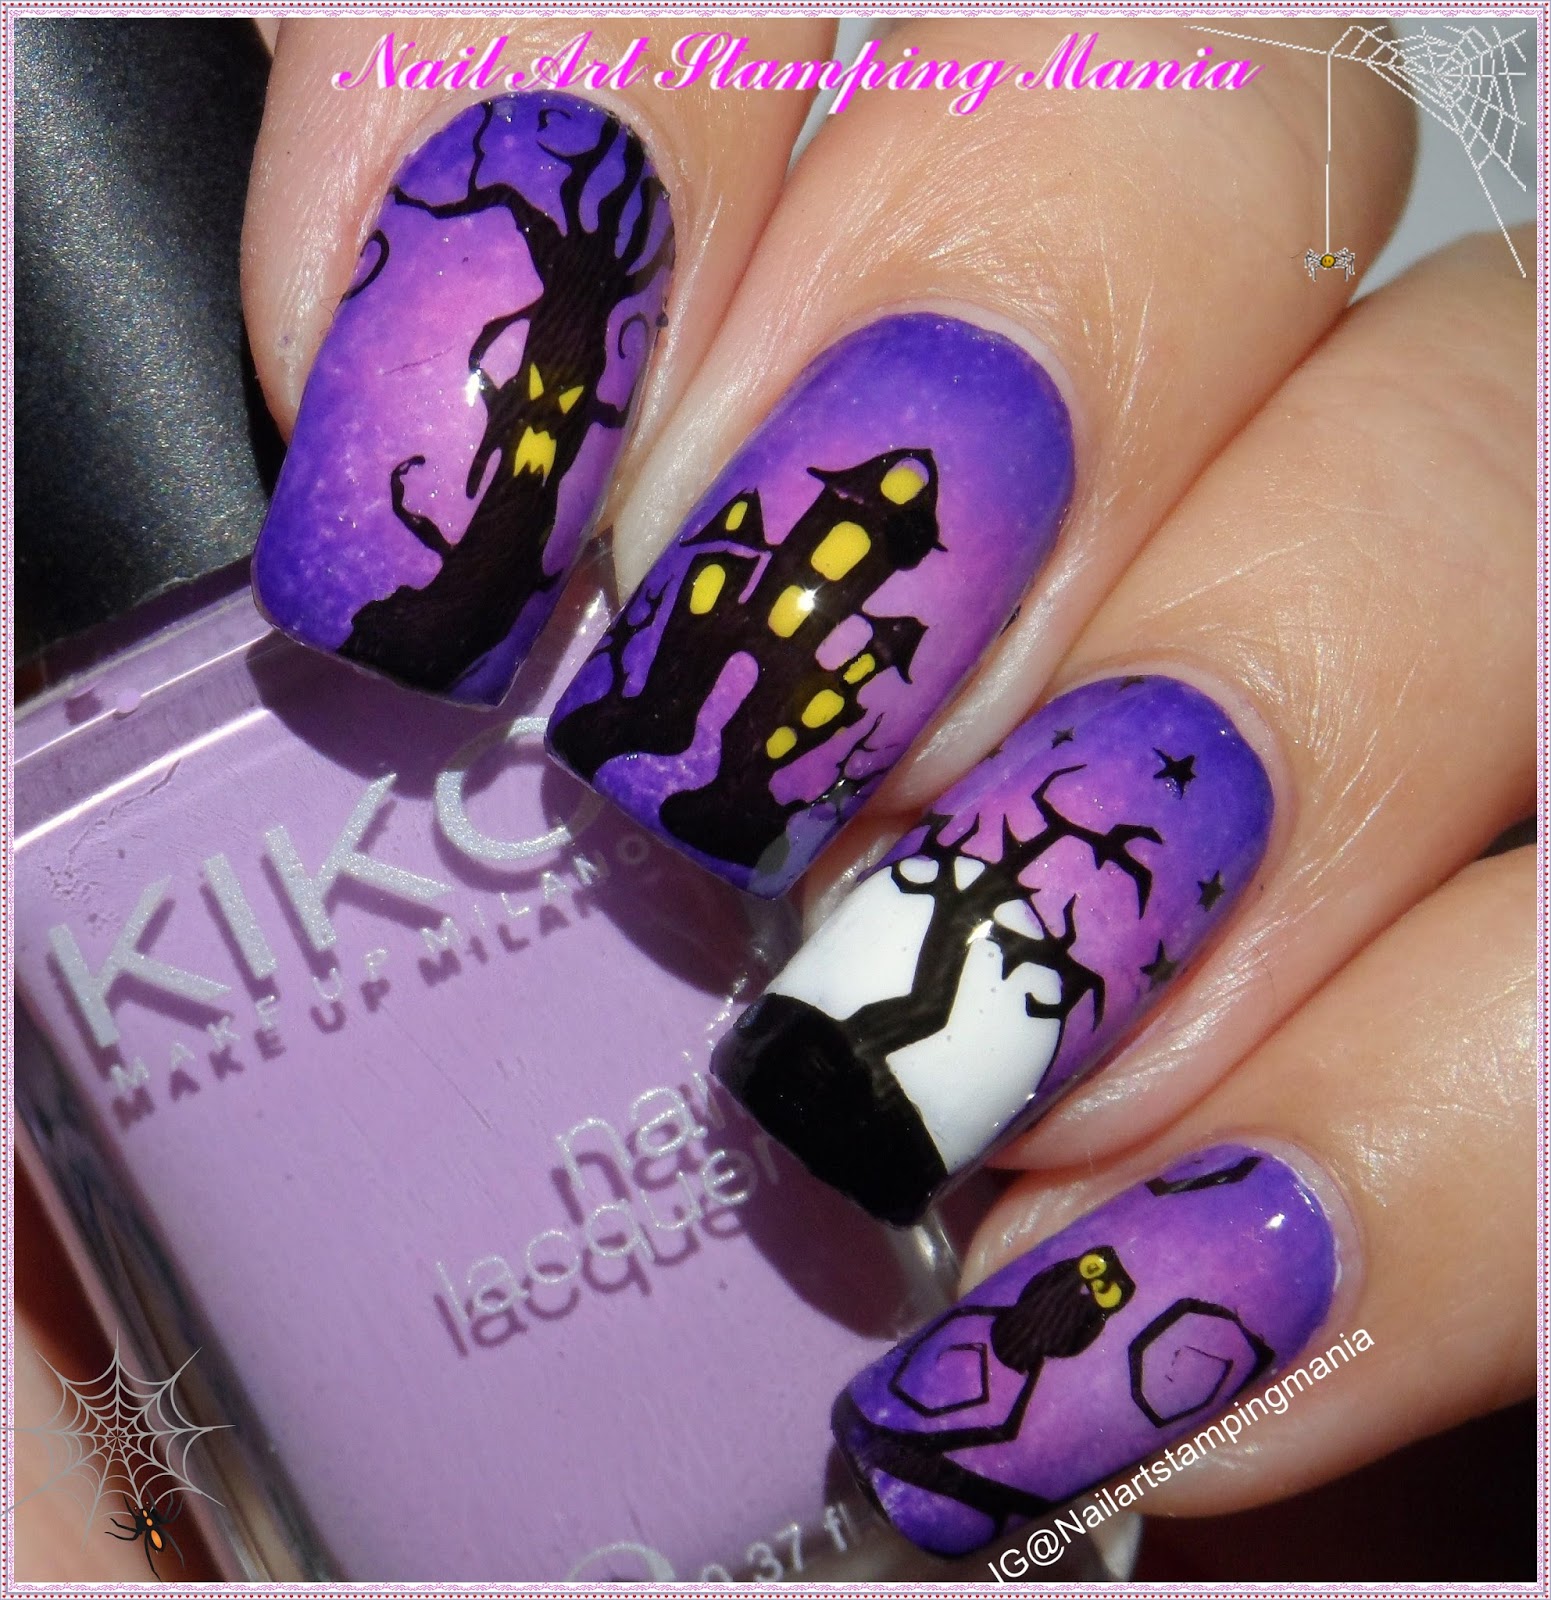 Nail Art Stamping Mania: Halloween Manicure with UberChic ...